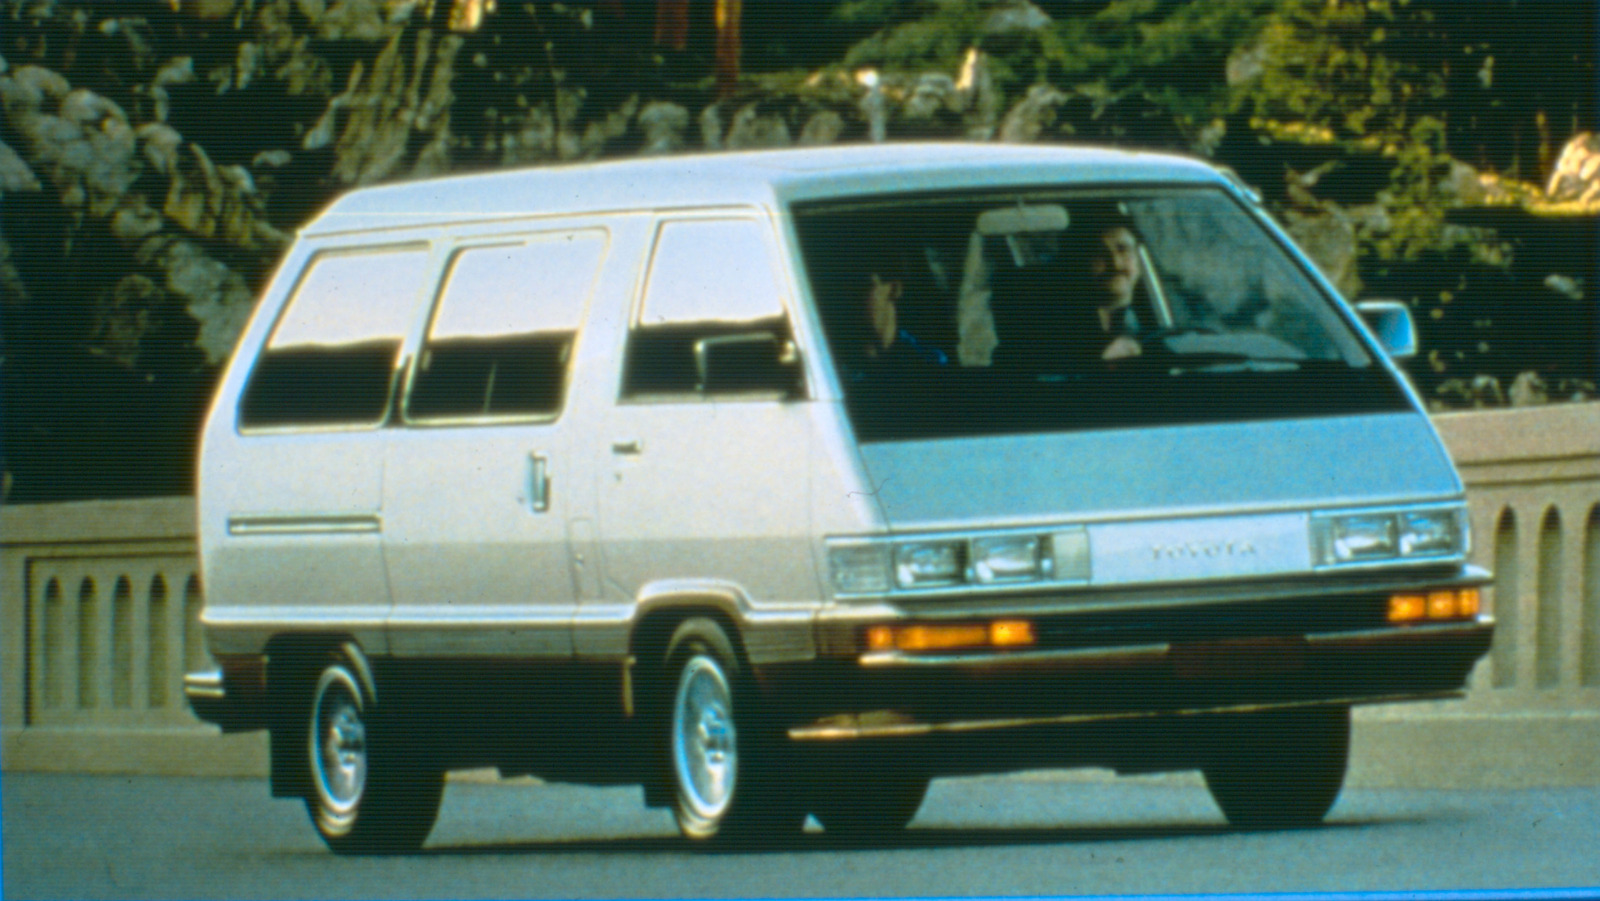 This 80s Toyota Van Had A Strange Feature You Won't Find In Your New Car